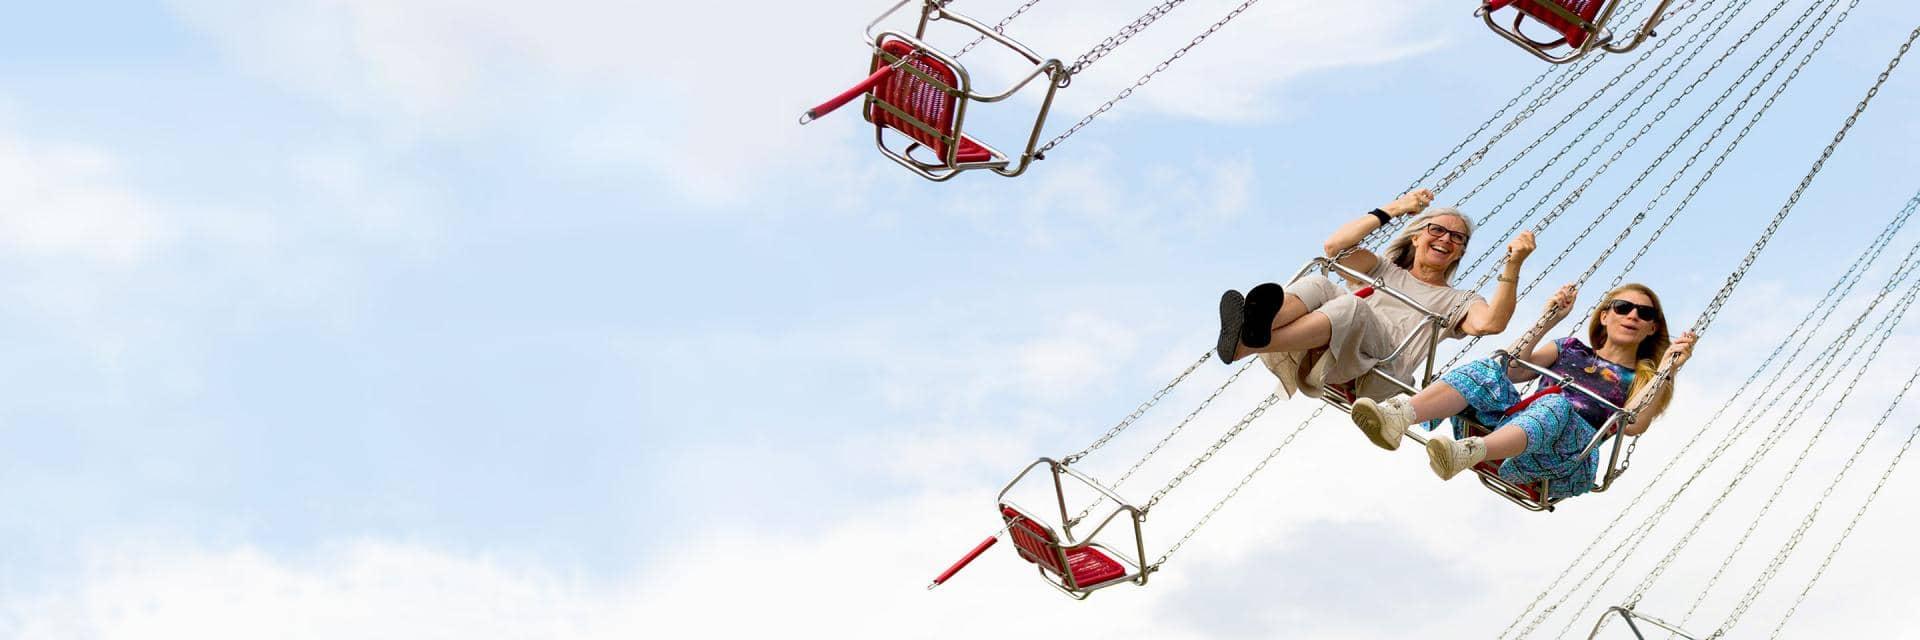 Two women in the air on a fairground swing ride
